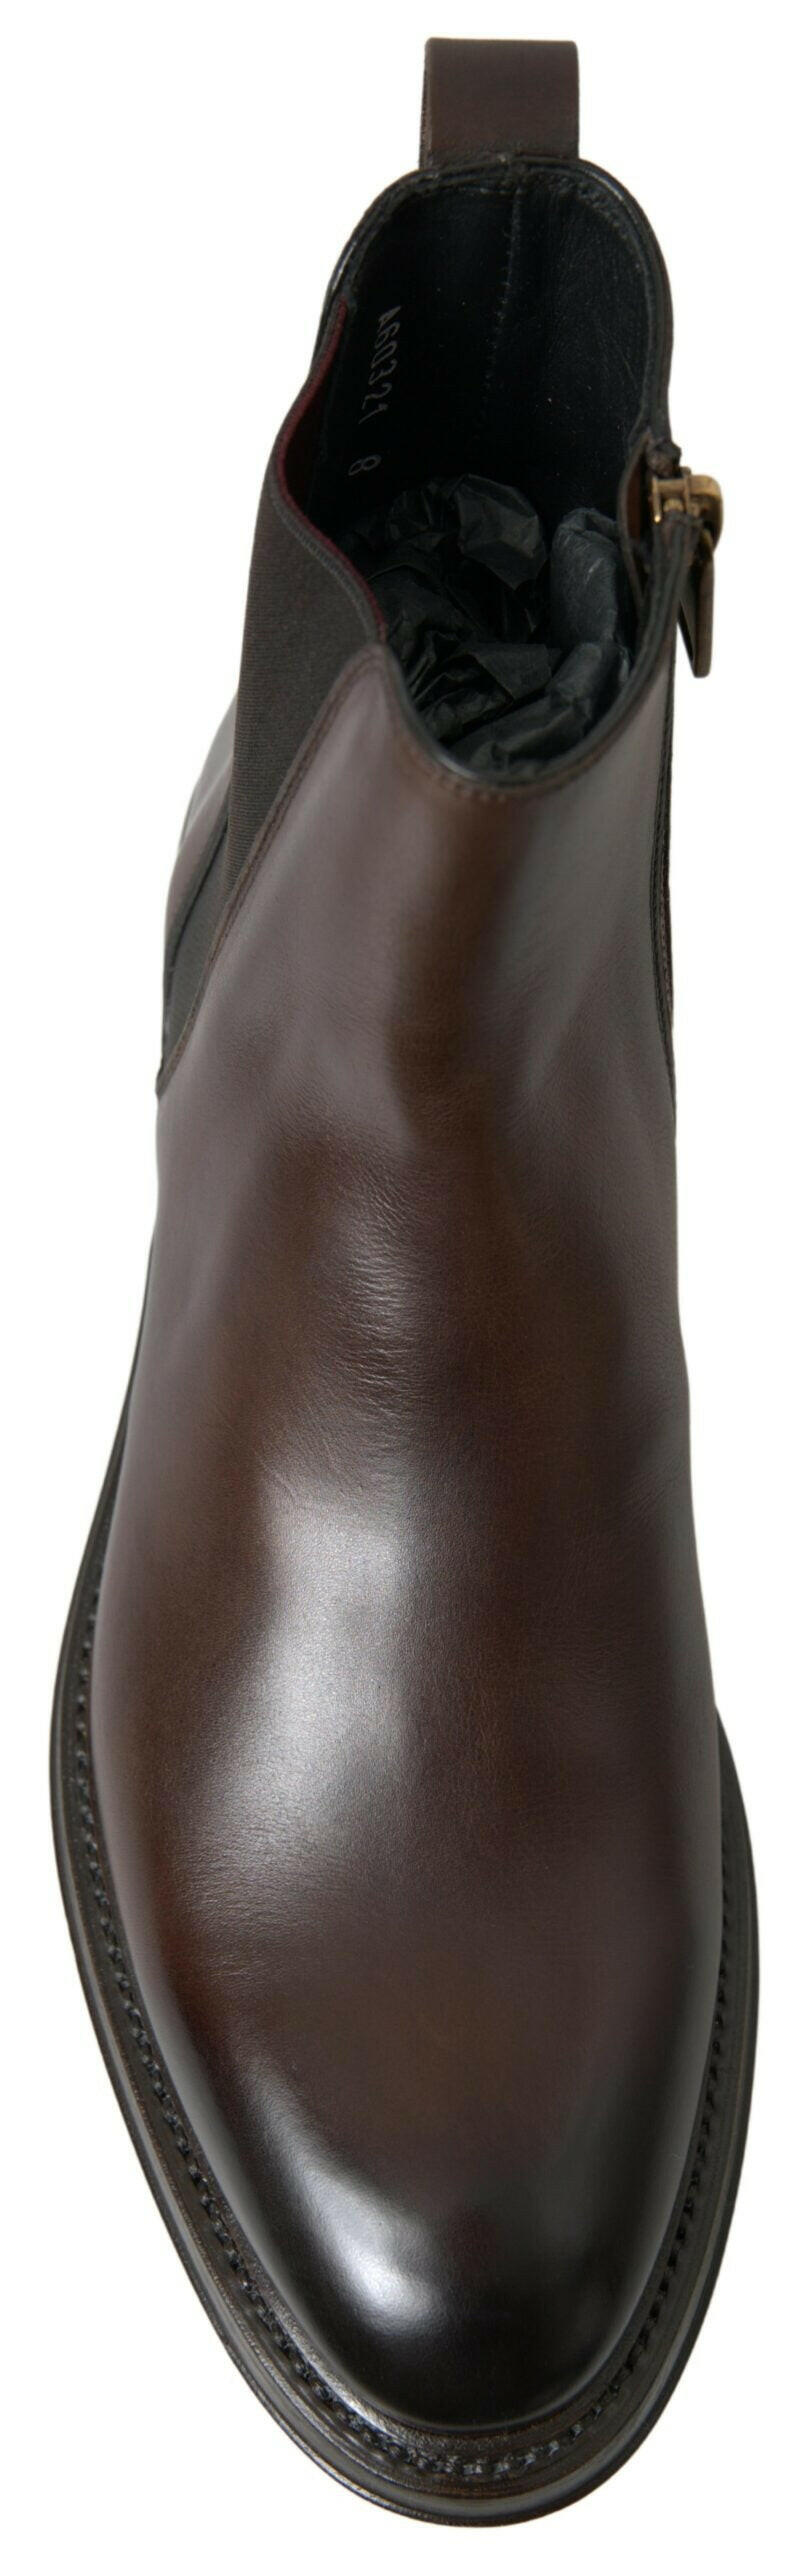 Dolce & Gabbana Brown Leather Chelsea Mens Boots Shoes - GENUINE AUTHENTIC BRAND LLC  